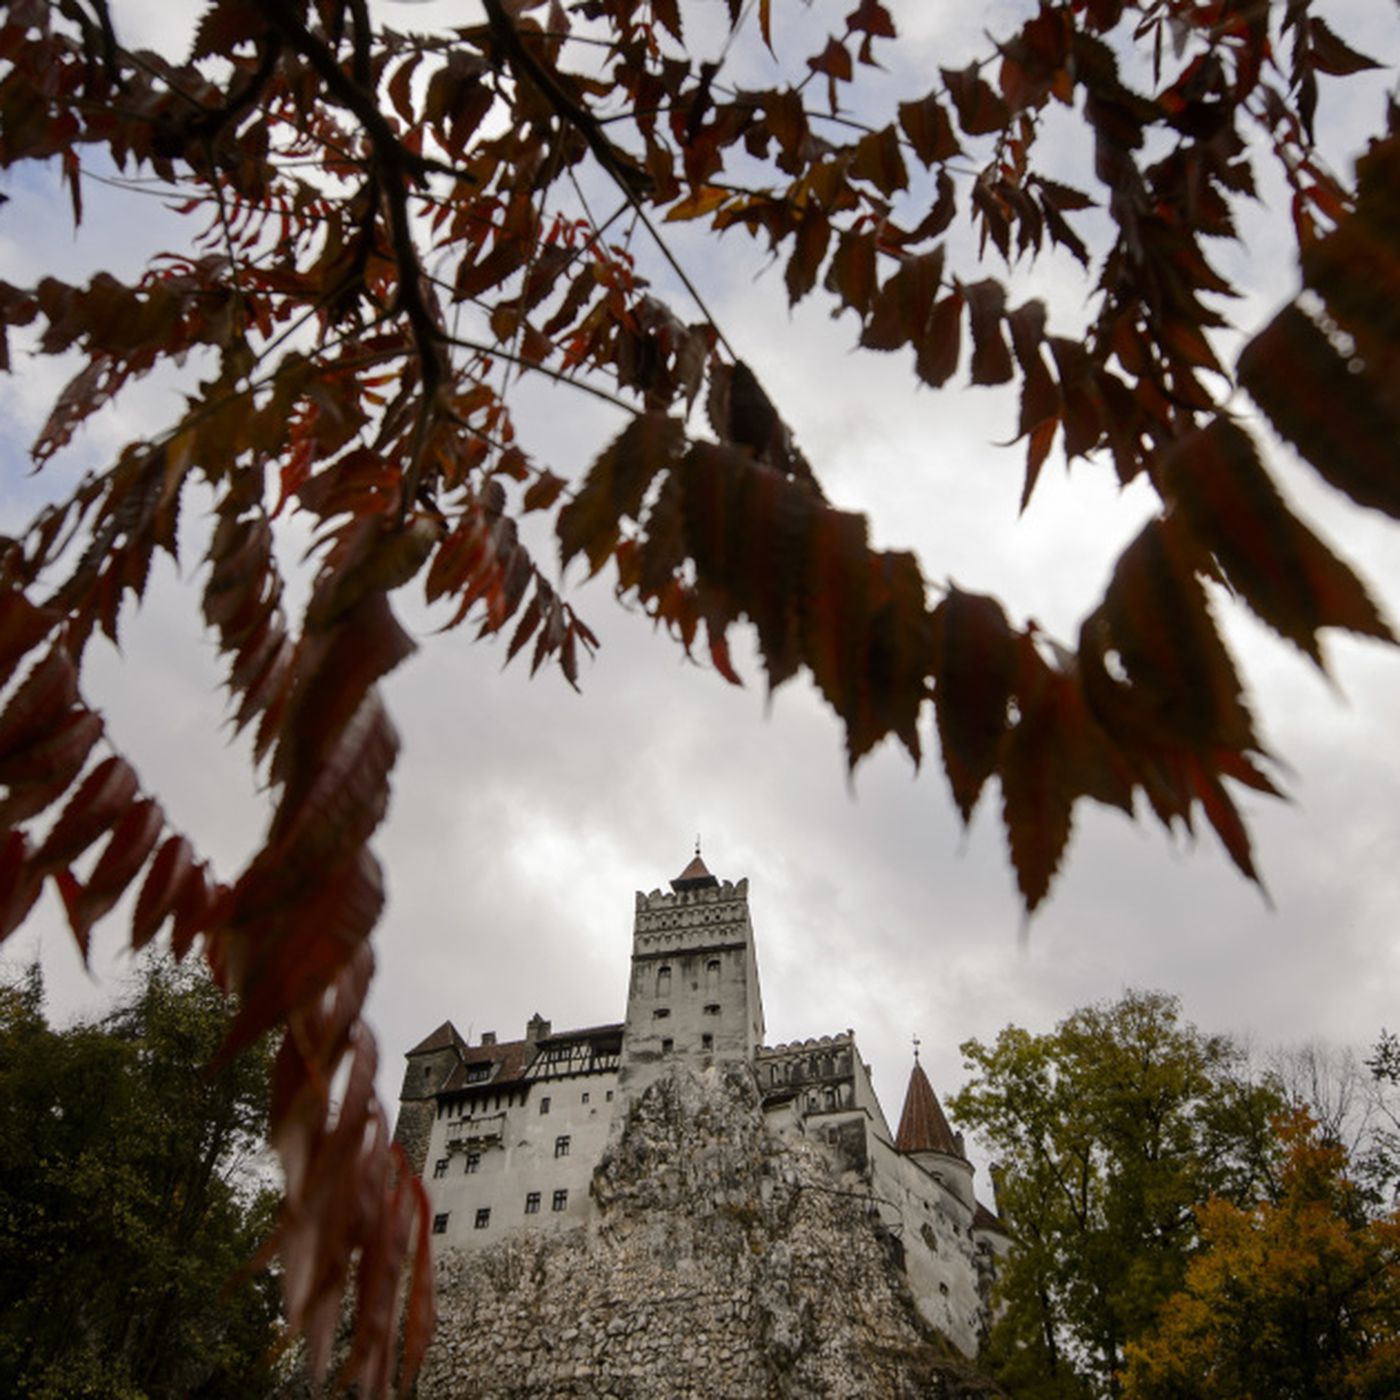 Halloween Treat A Night At Dracula S Castle In Transylvania Chicago Sun Times,Christmas Gifts Ideas For Friends